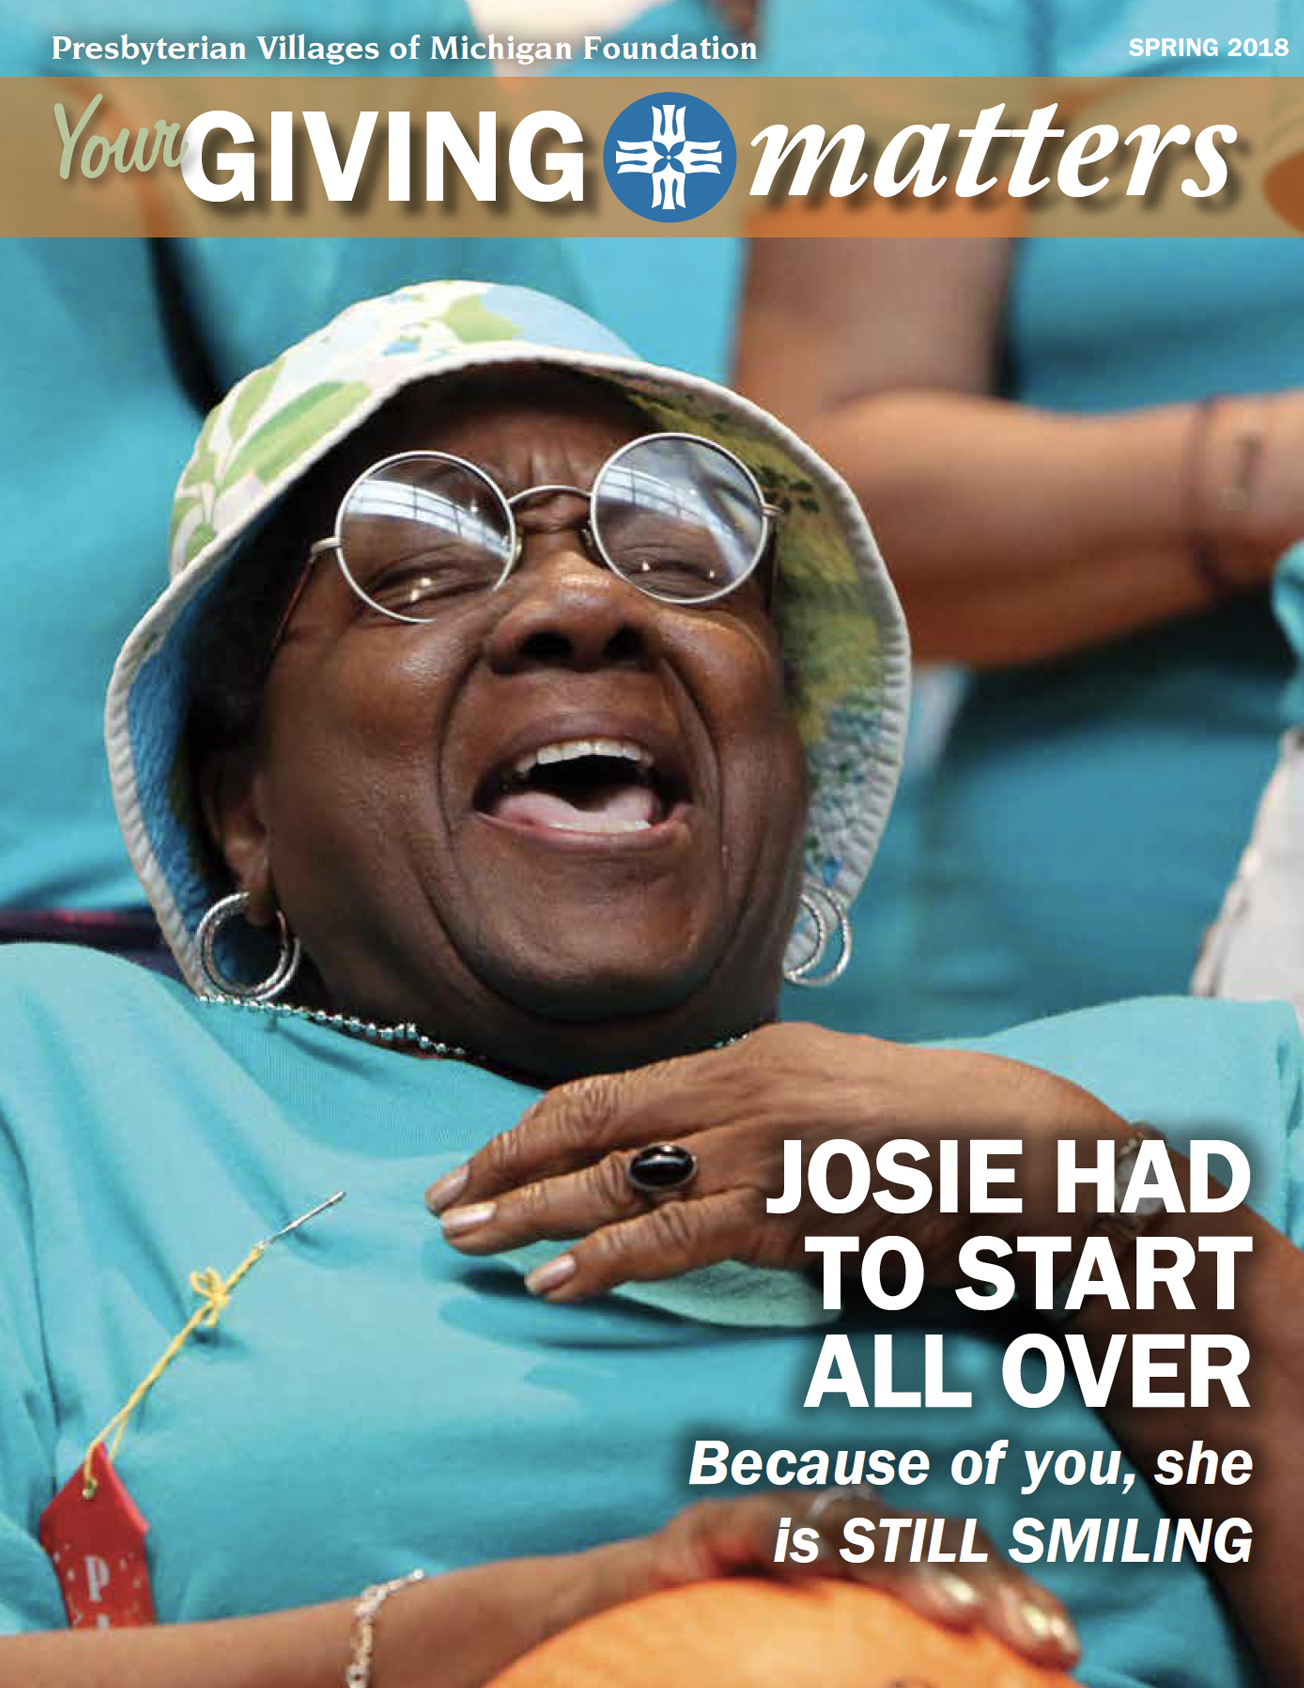 Read the Spring 2018 issue of Your Giving Matters. This issue features Josie. She had to start all over again, but thanks to the help of donors, she's thriving! Find out more about the amazing work the PVM Foundation can do thanks to the donors!